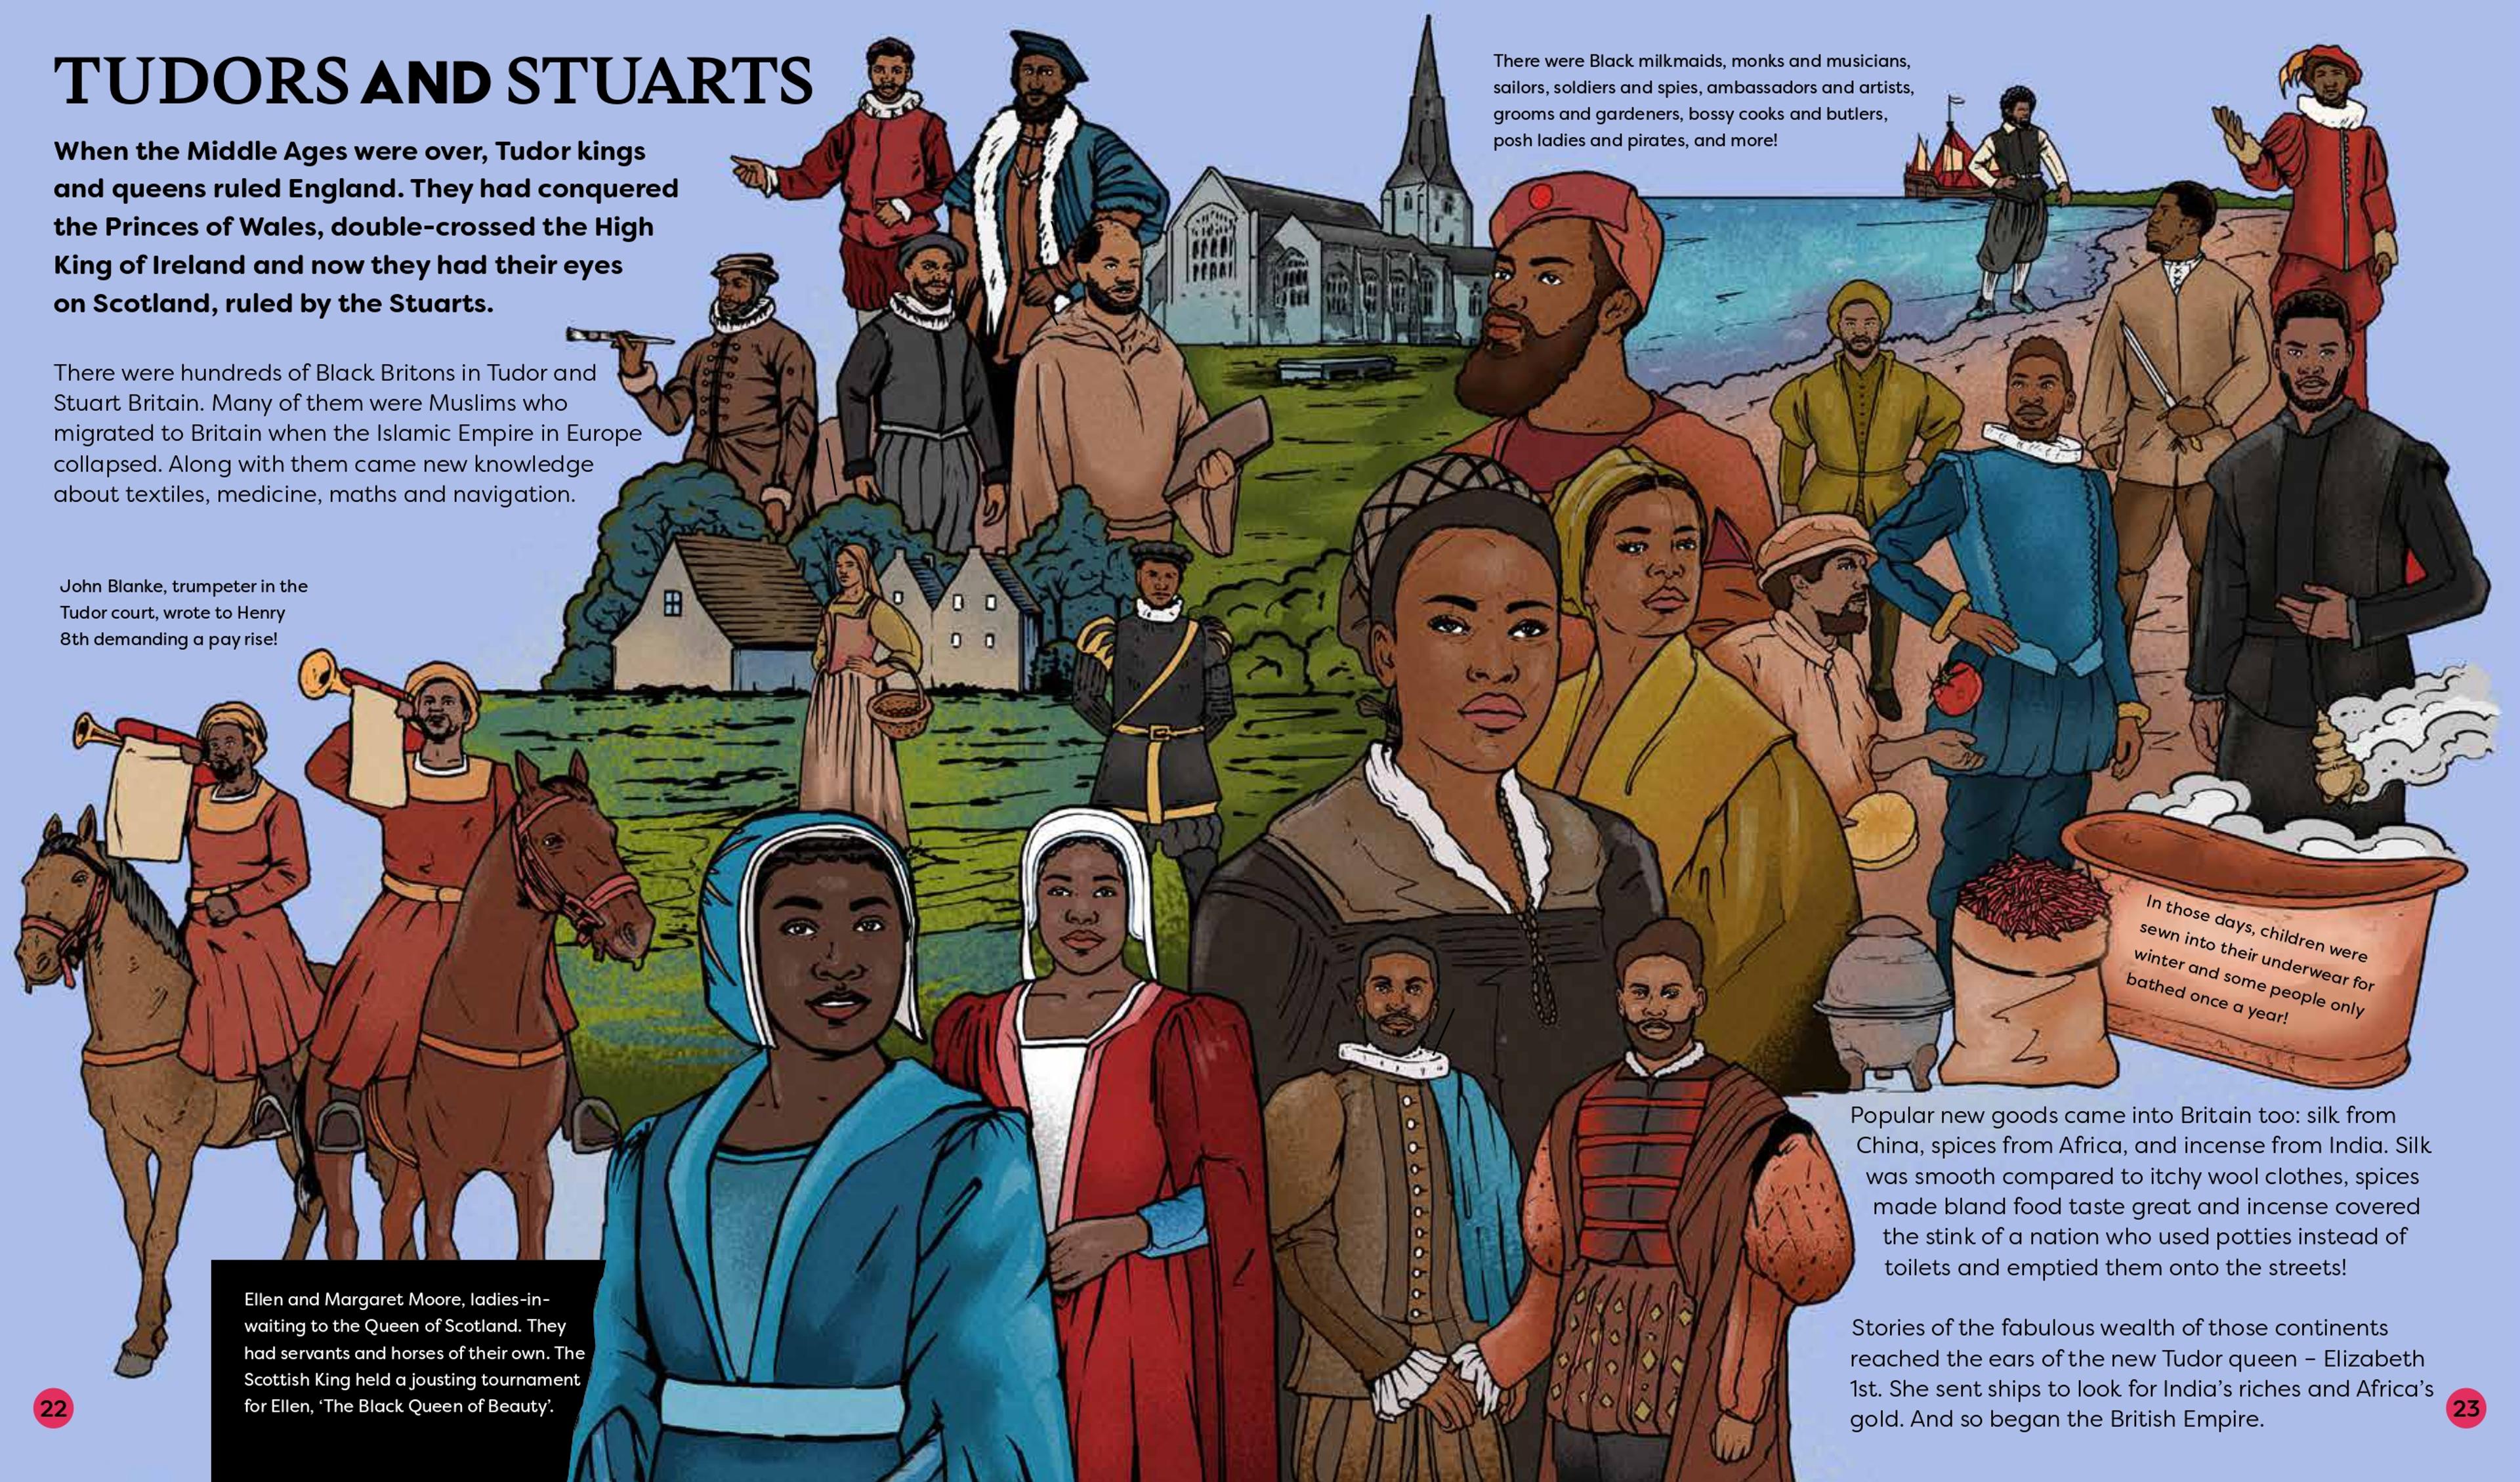 A spread from the book titled 'Tudors and Stuarts', featuring blocks of text and a brightly-coloured illustrated portraits